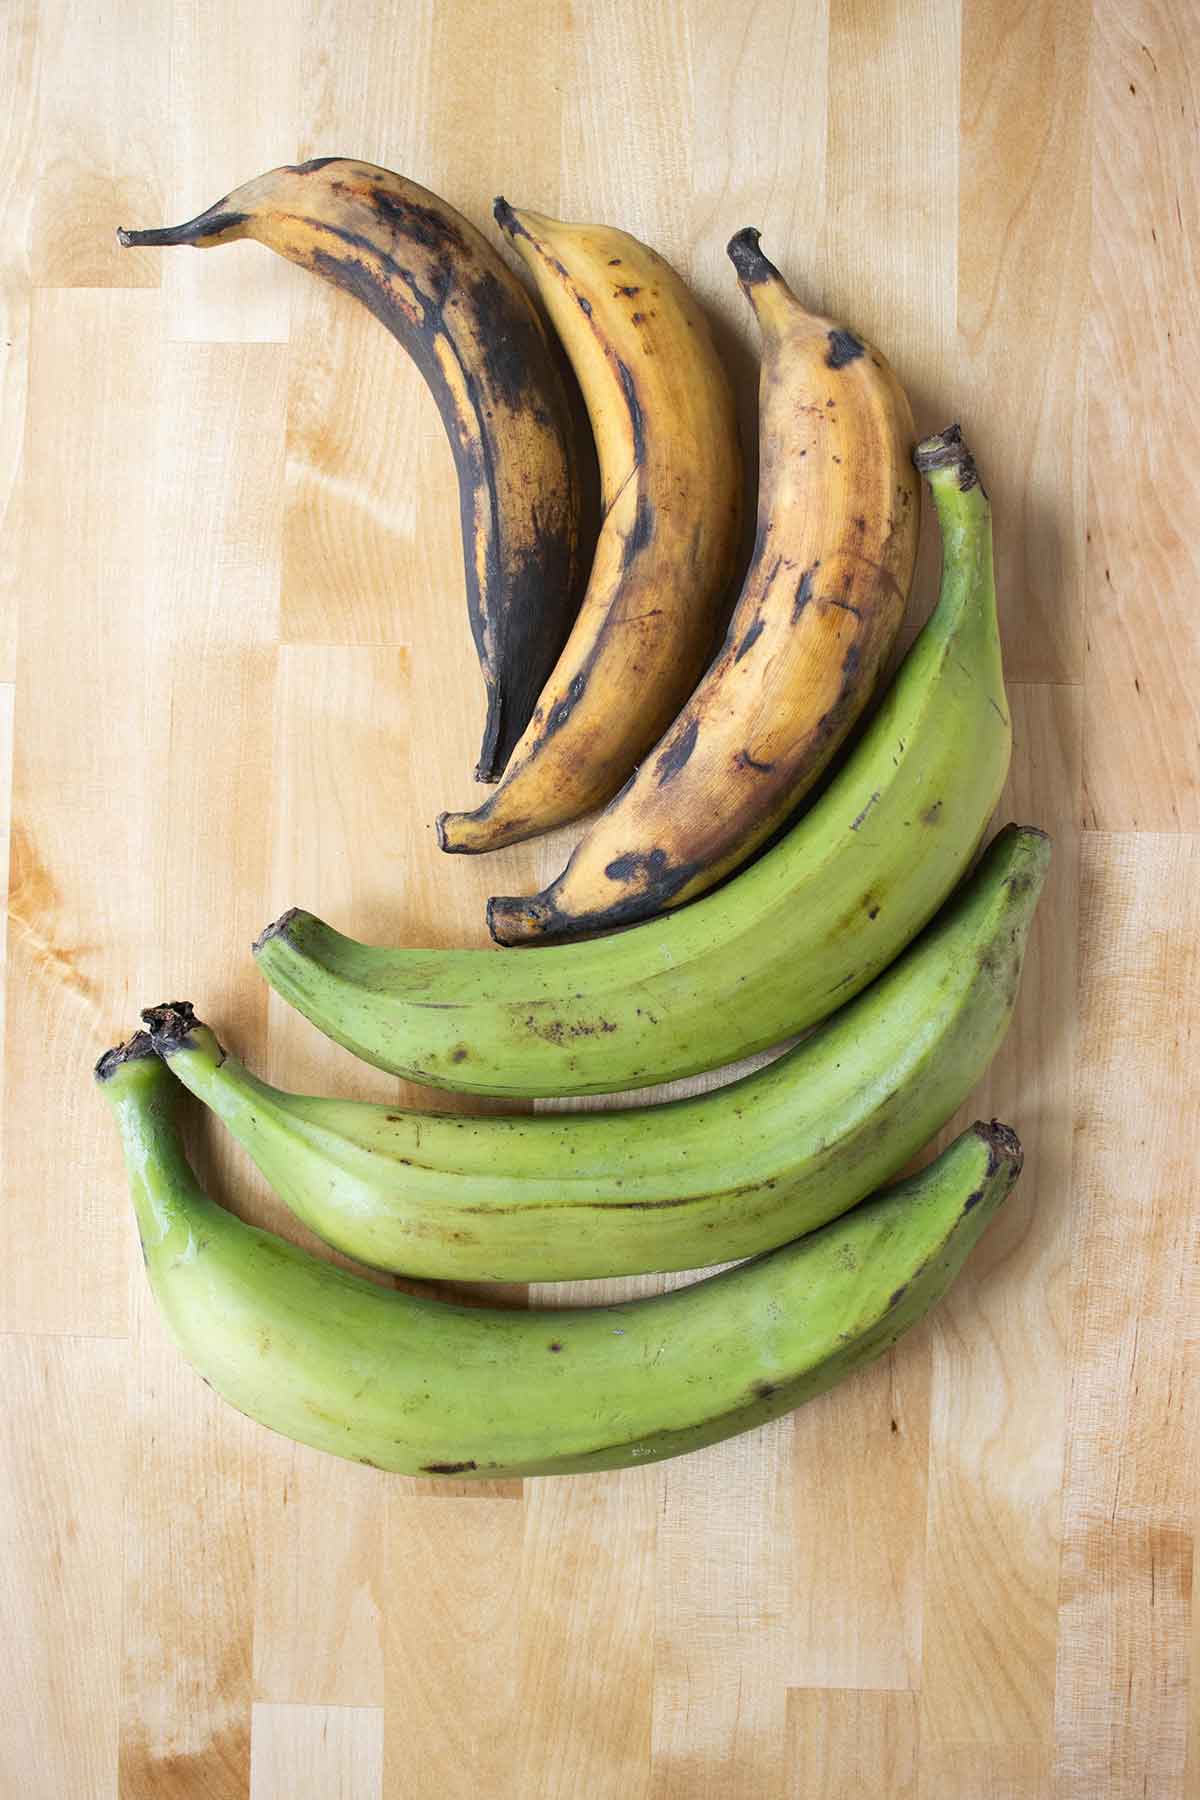 6 plantains on a table, 3 ripe plantains next to 3 green plantains.